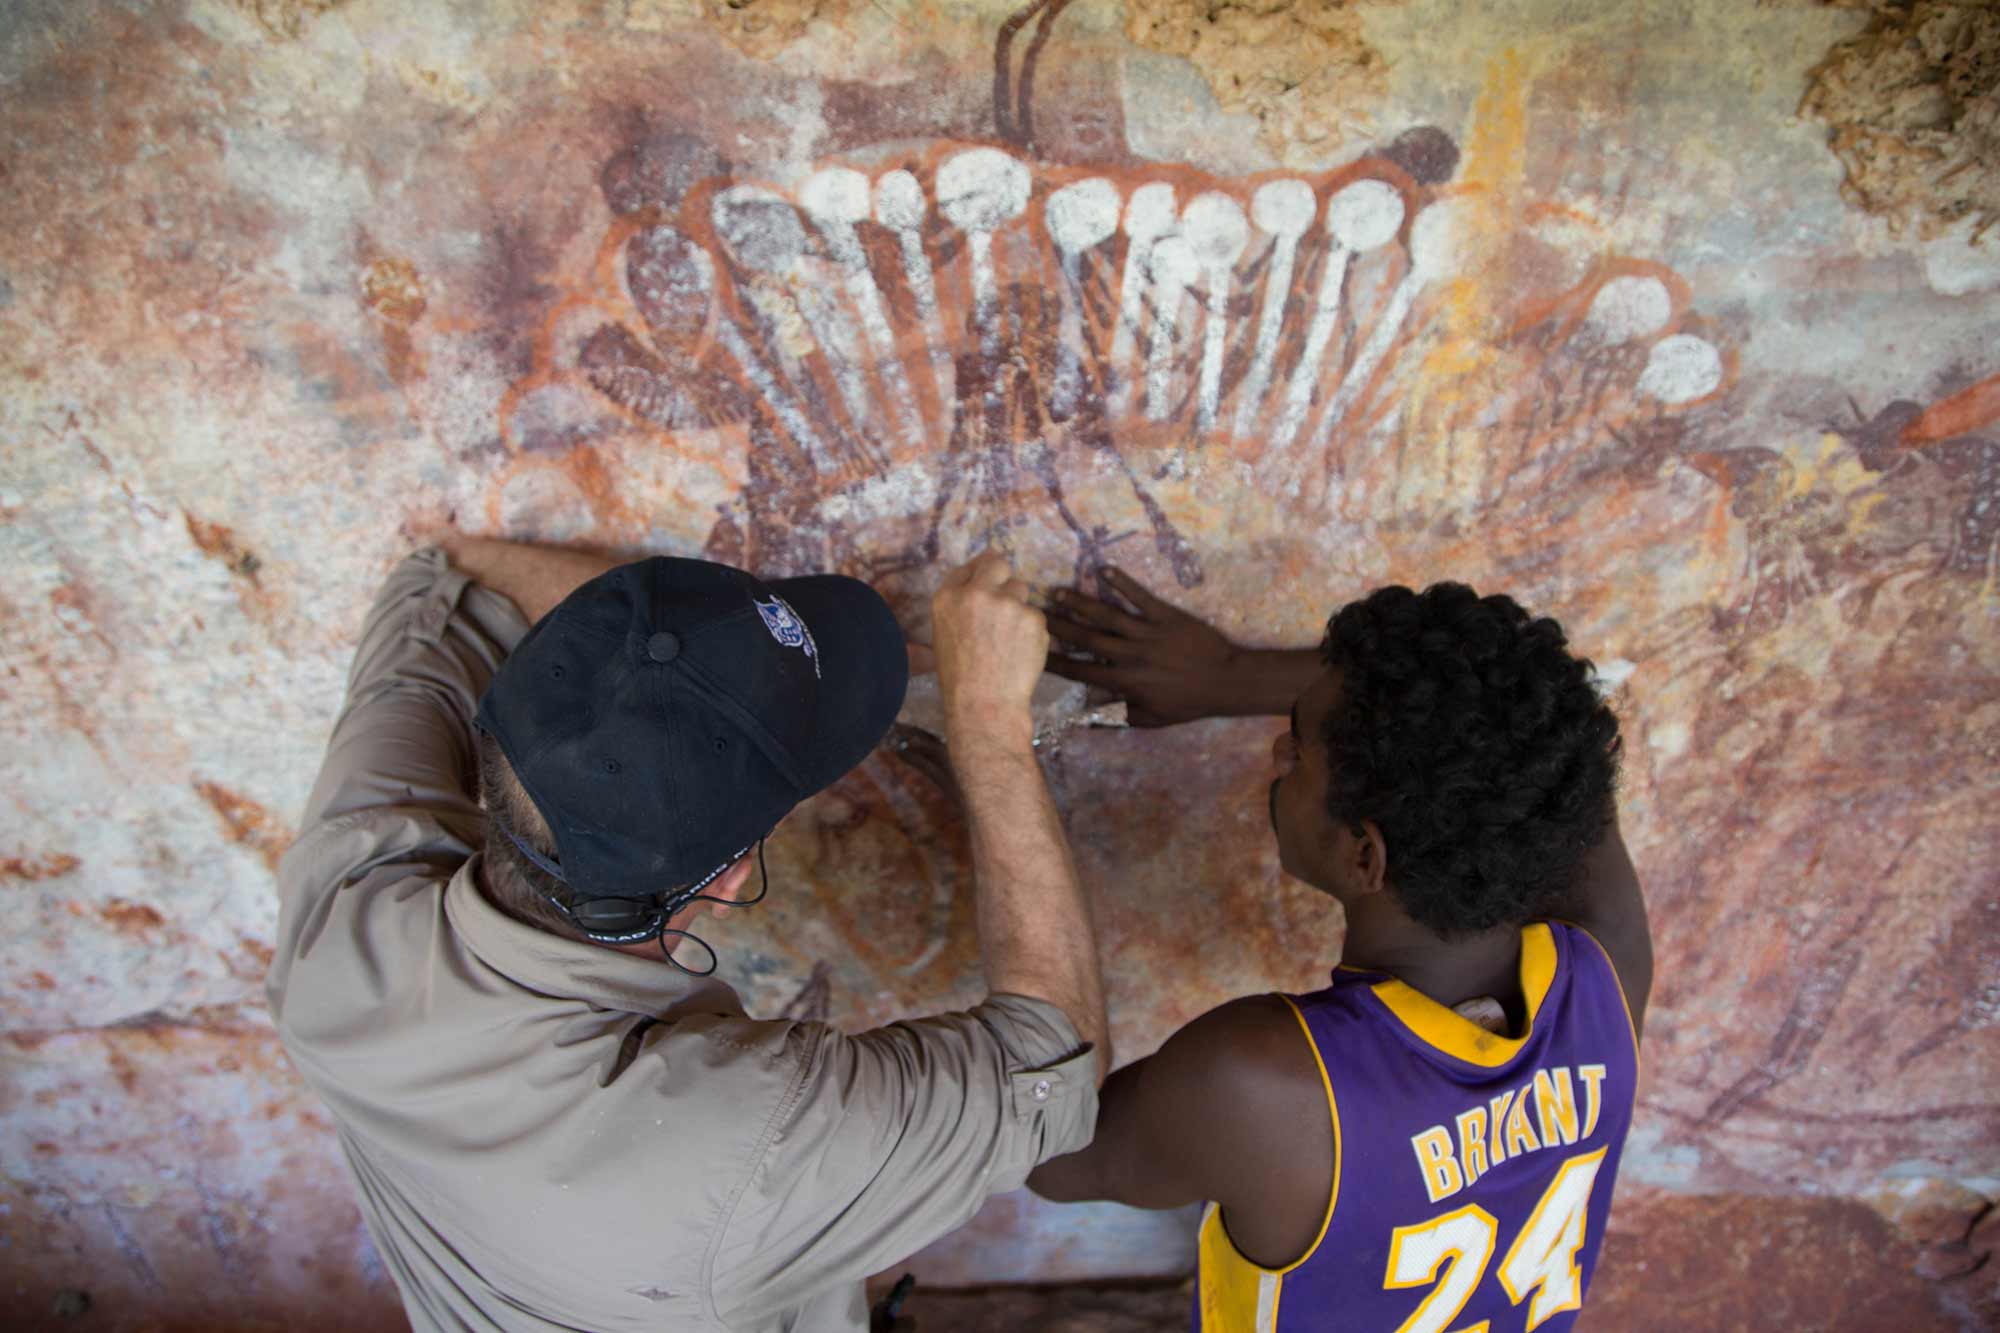 Photograph of two men scraping a sample of paint from rock art.